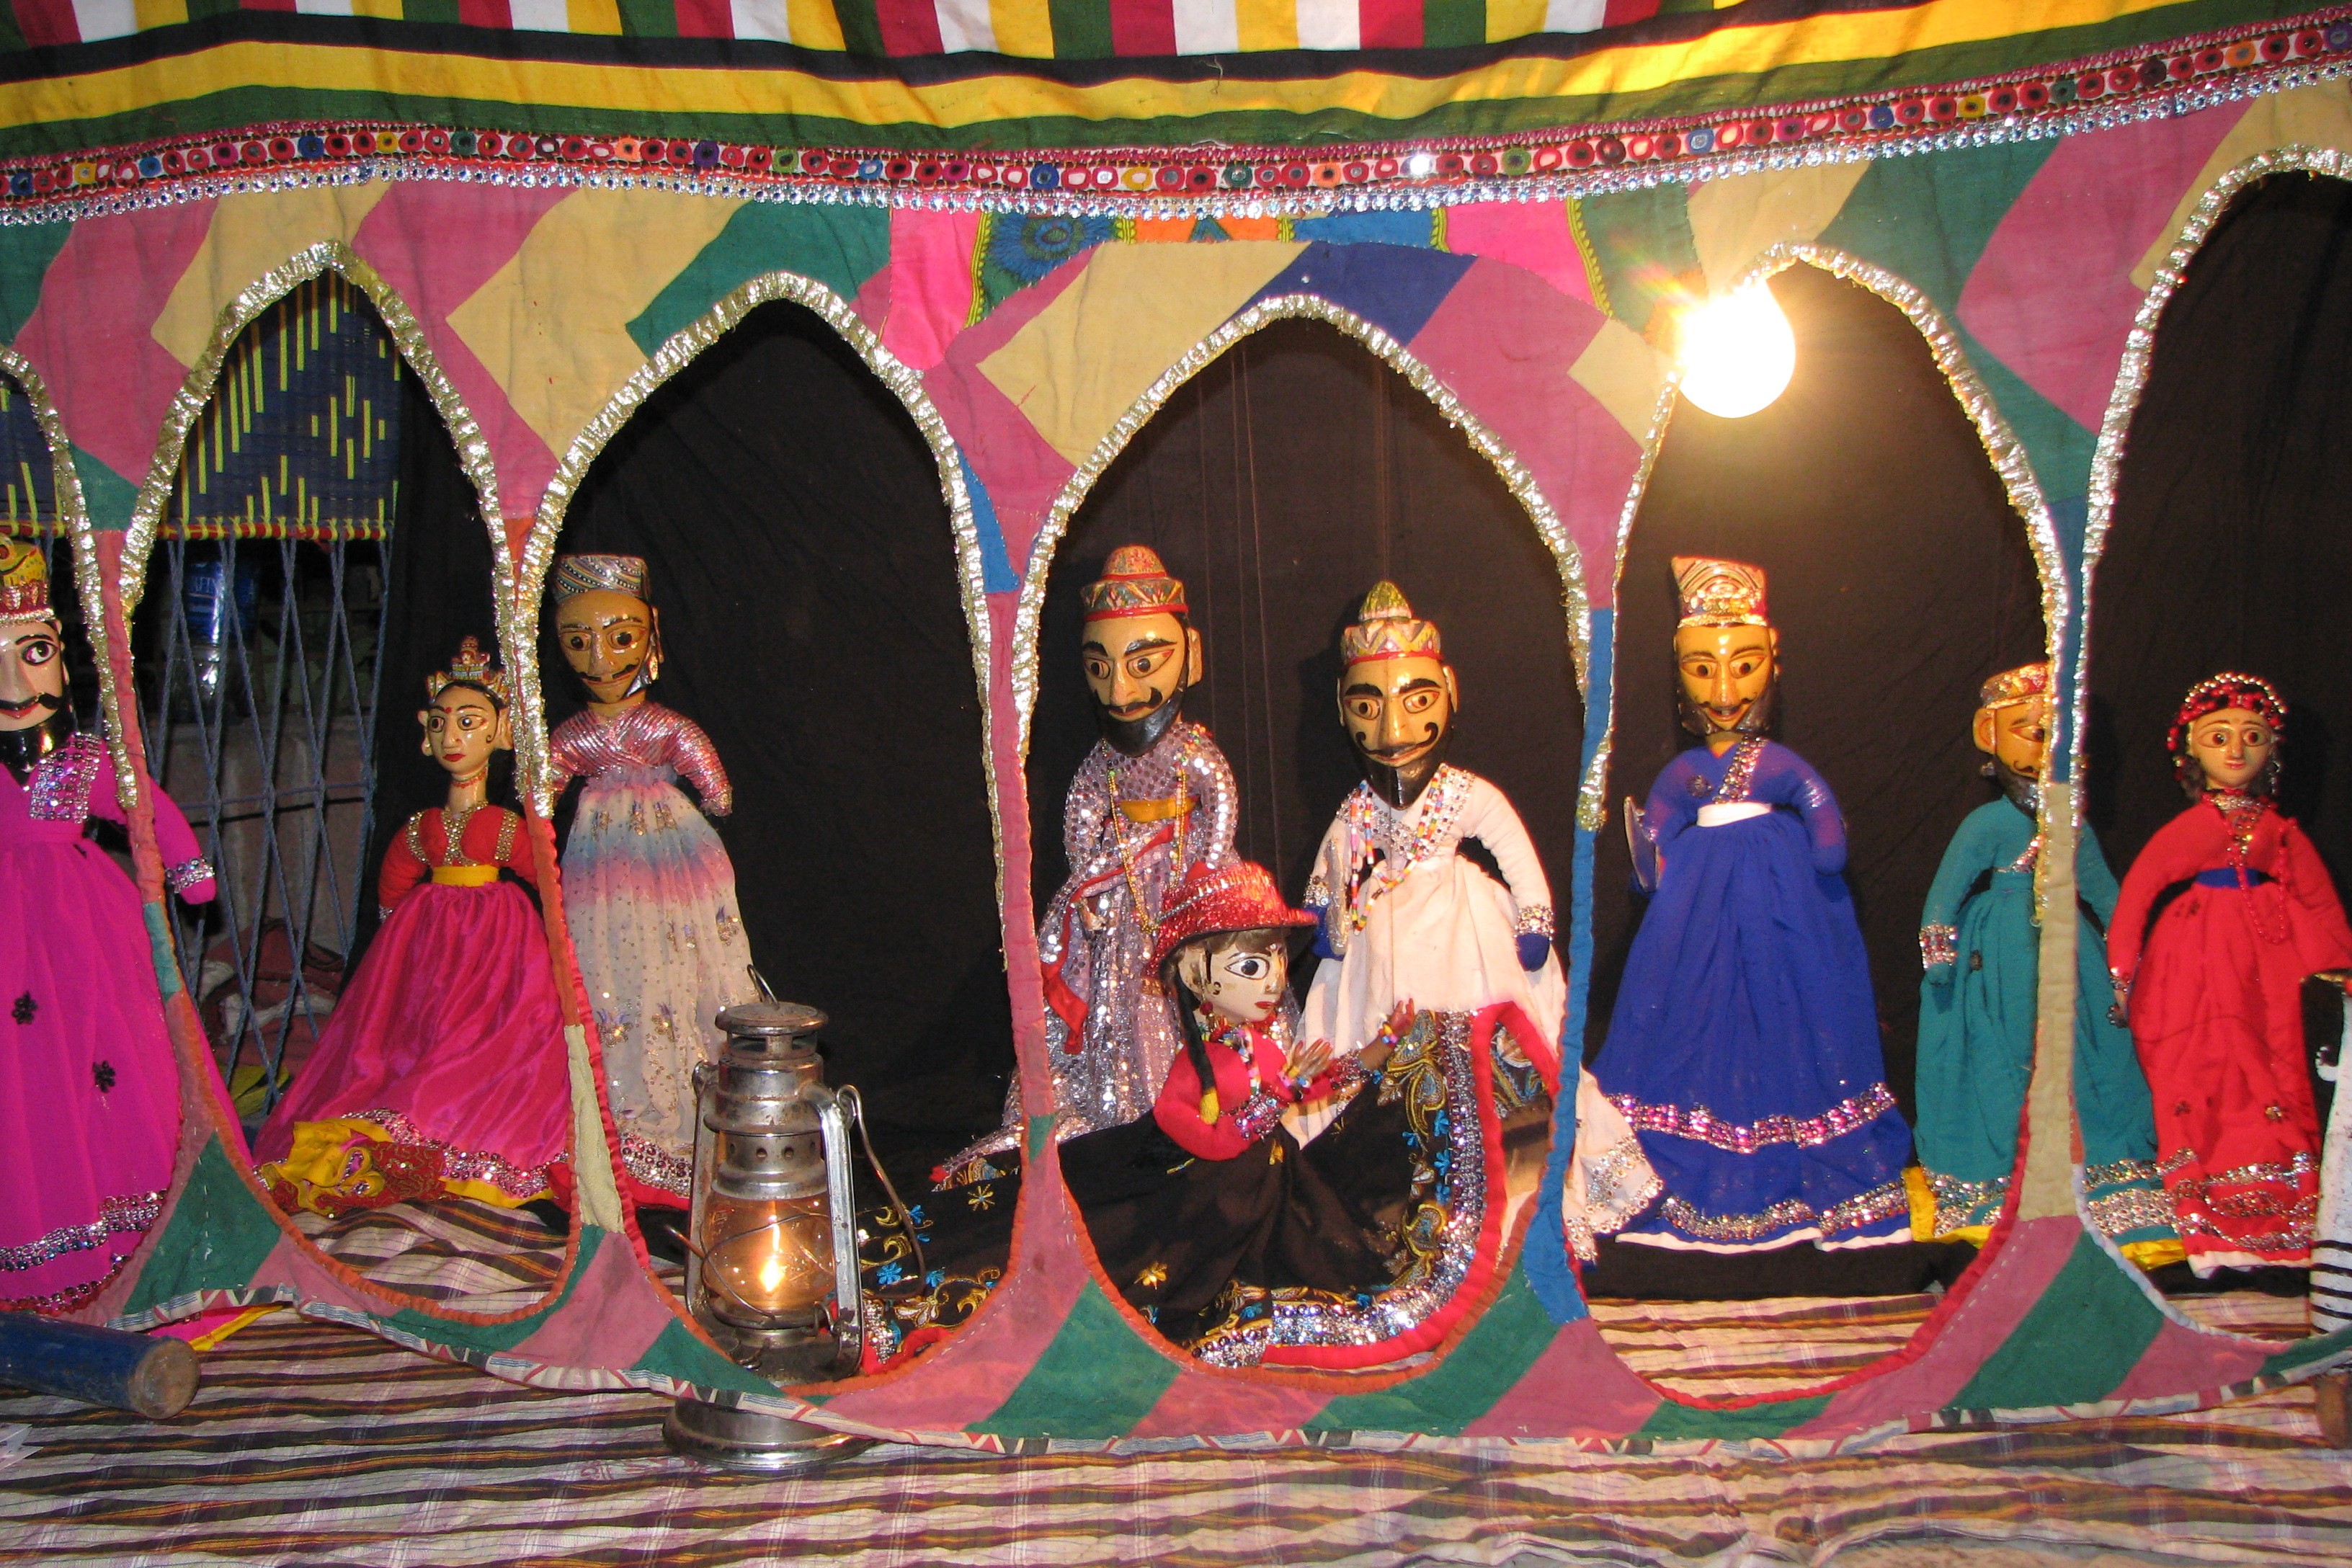 Puppet Show, a photo from Punjab, East | TrekEarth